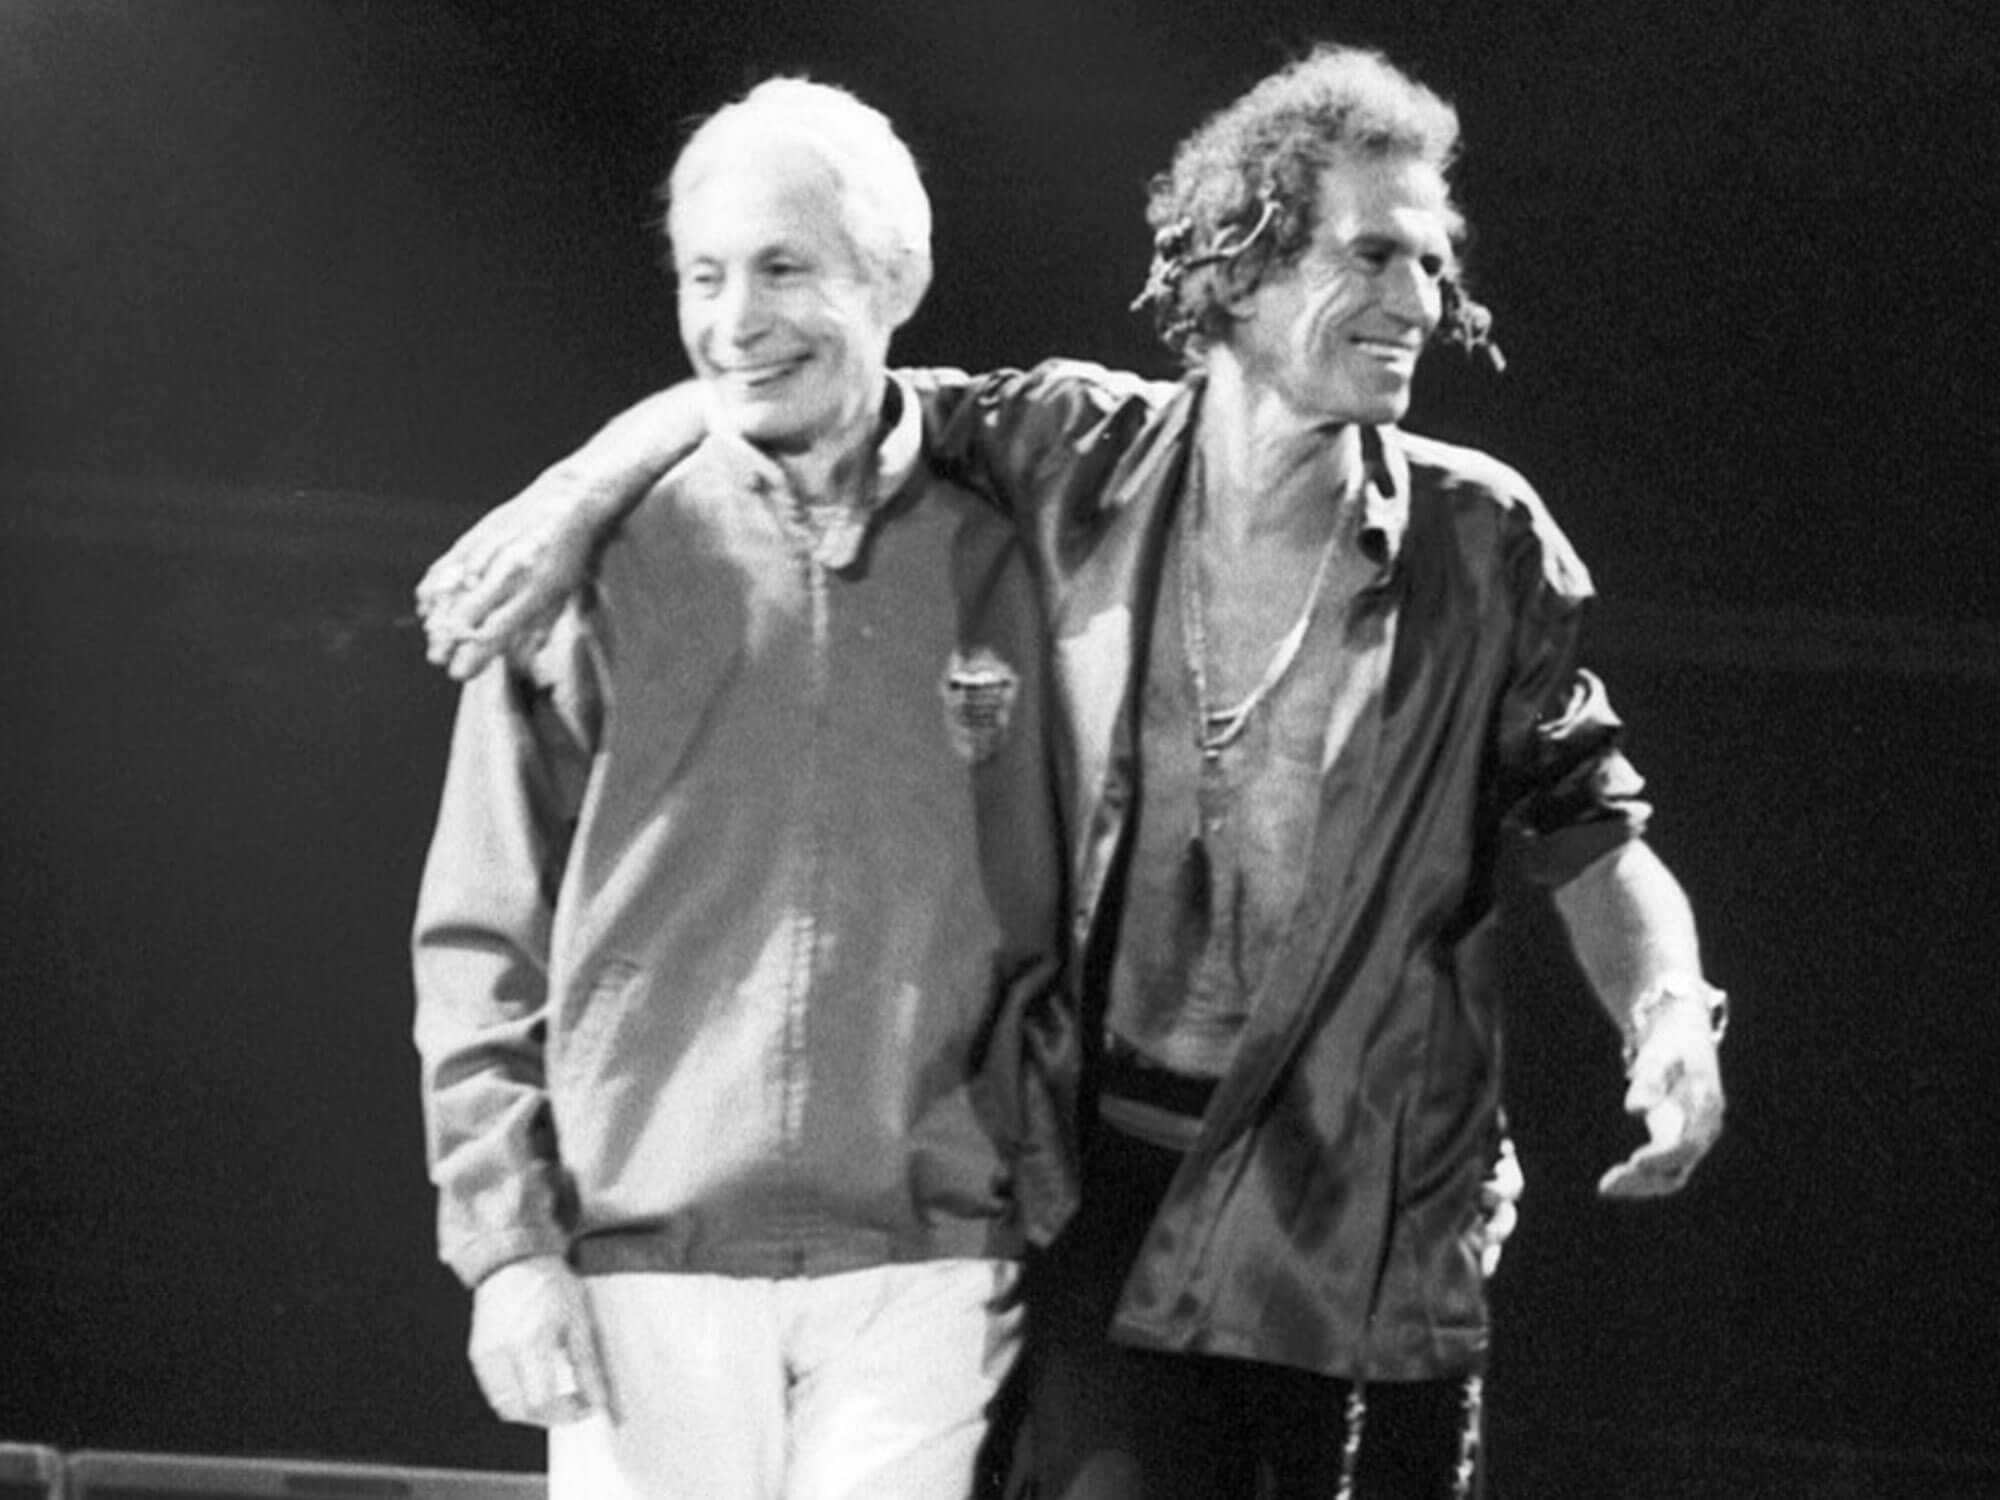 [L-R] Keith Richards and Charlie Watts